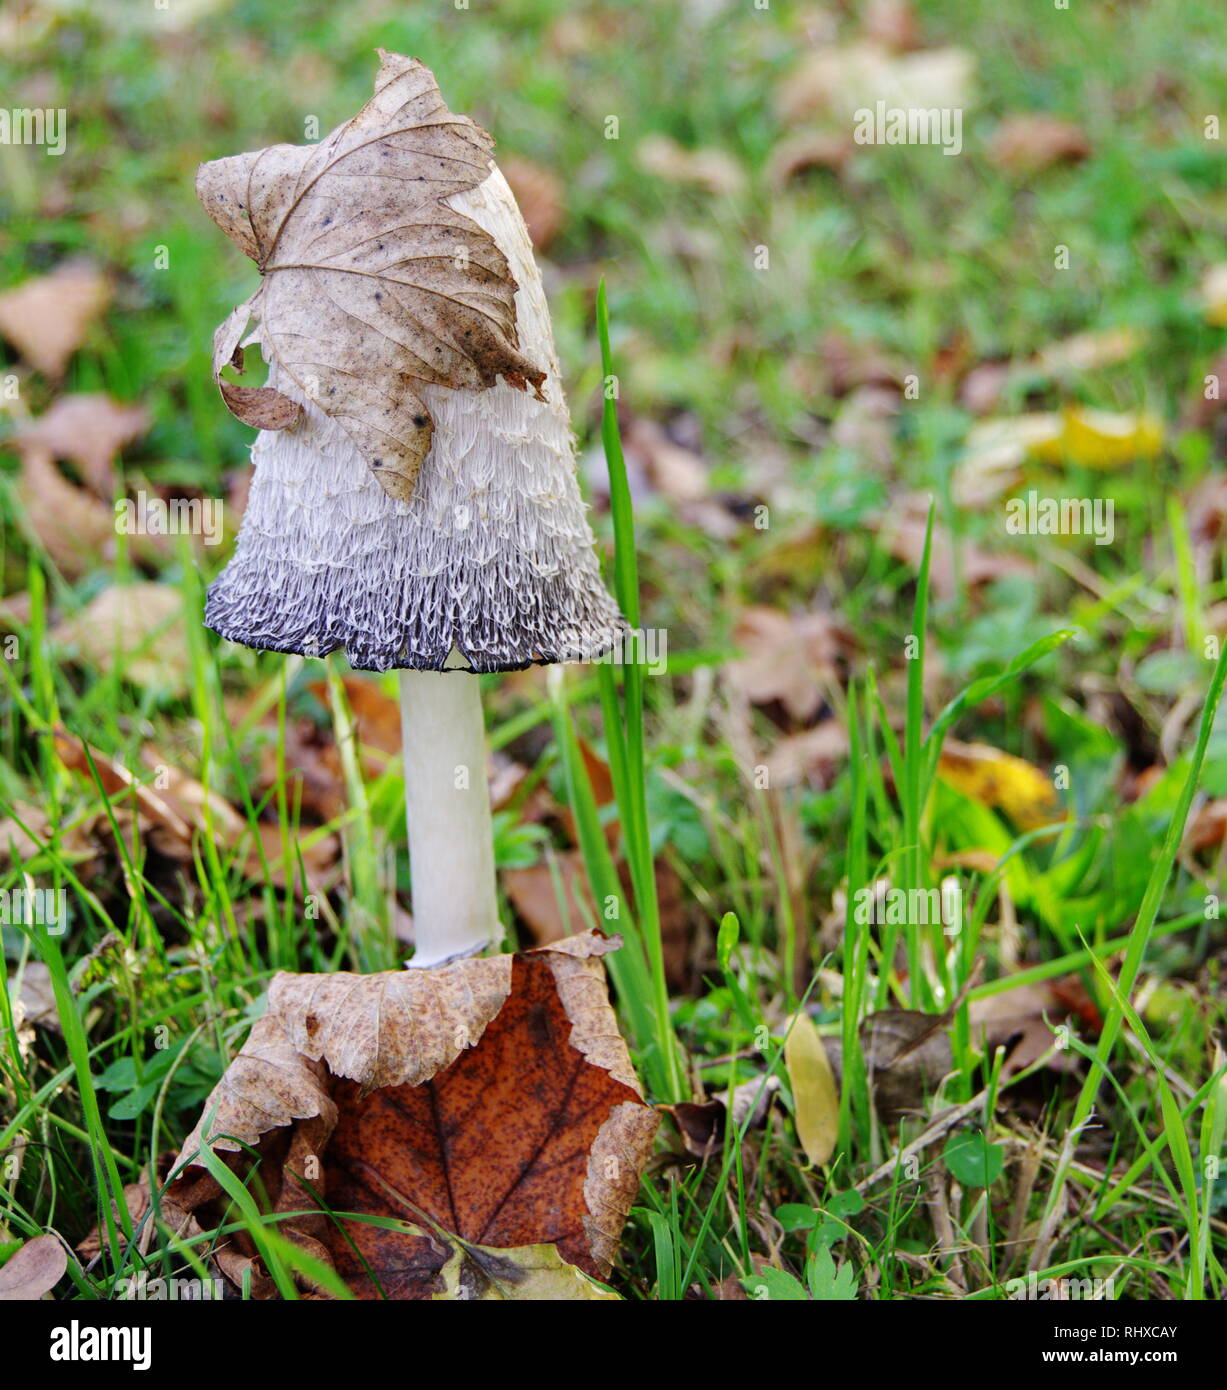 lonely mushroom in the meadow with autumn leaves Stock Photo